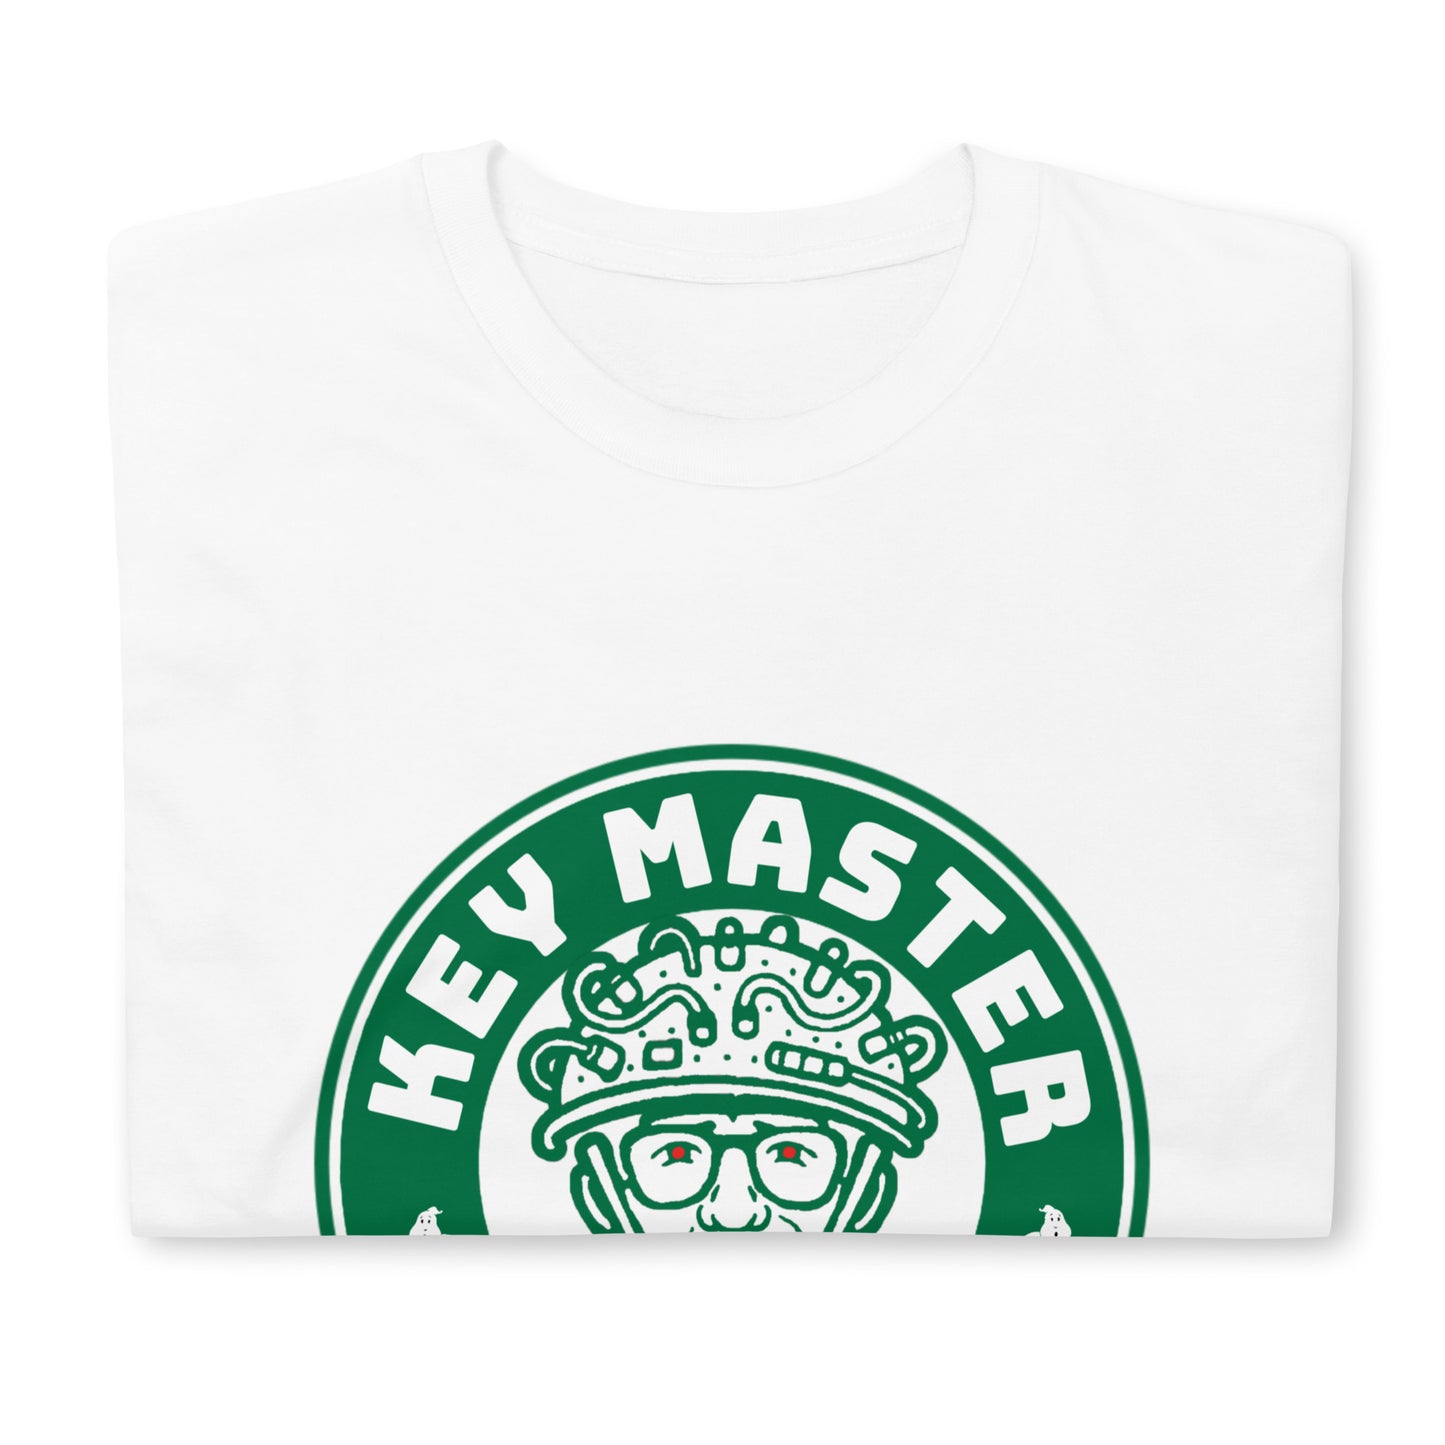 Ghostbusters T-Shirt, Key Master